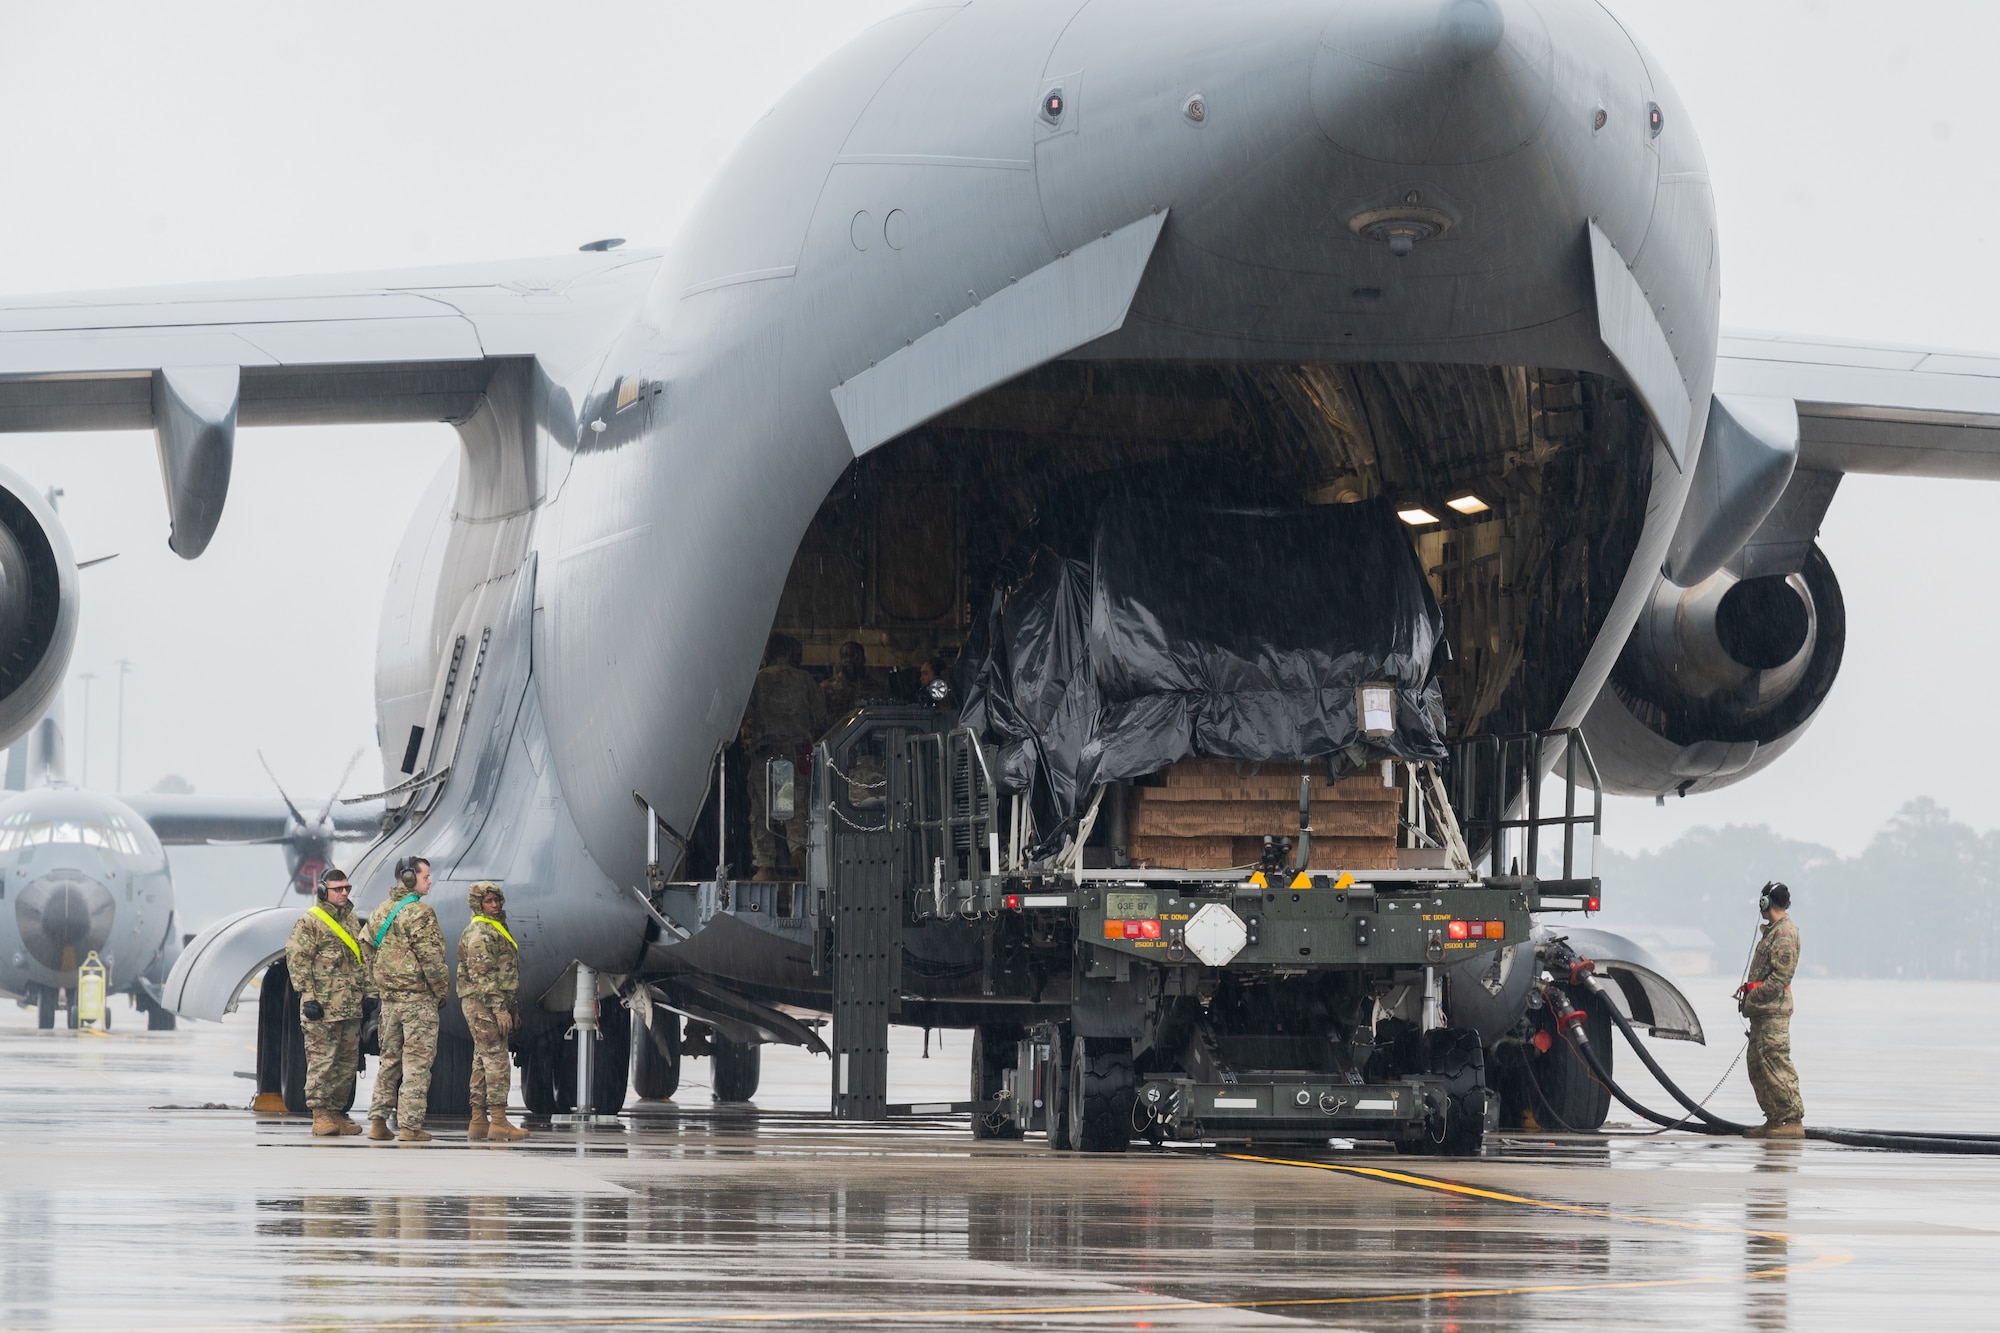 airmen load equipment into the back of a C-17